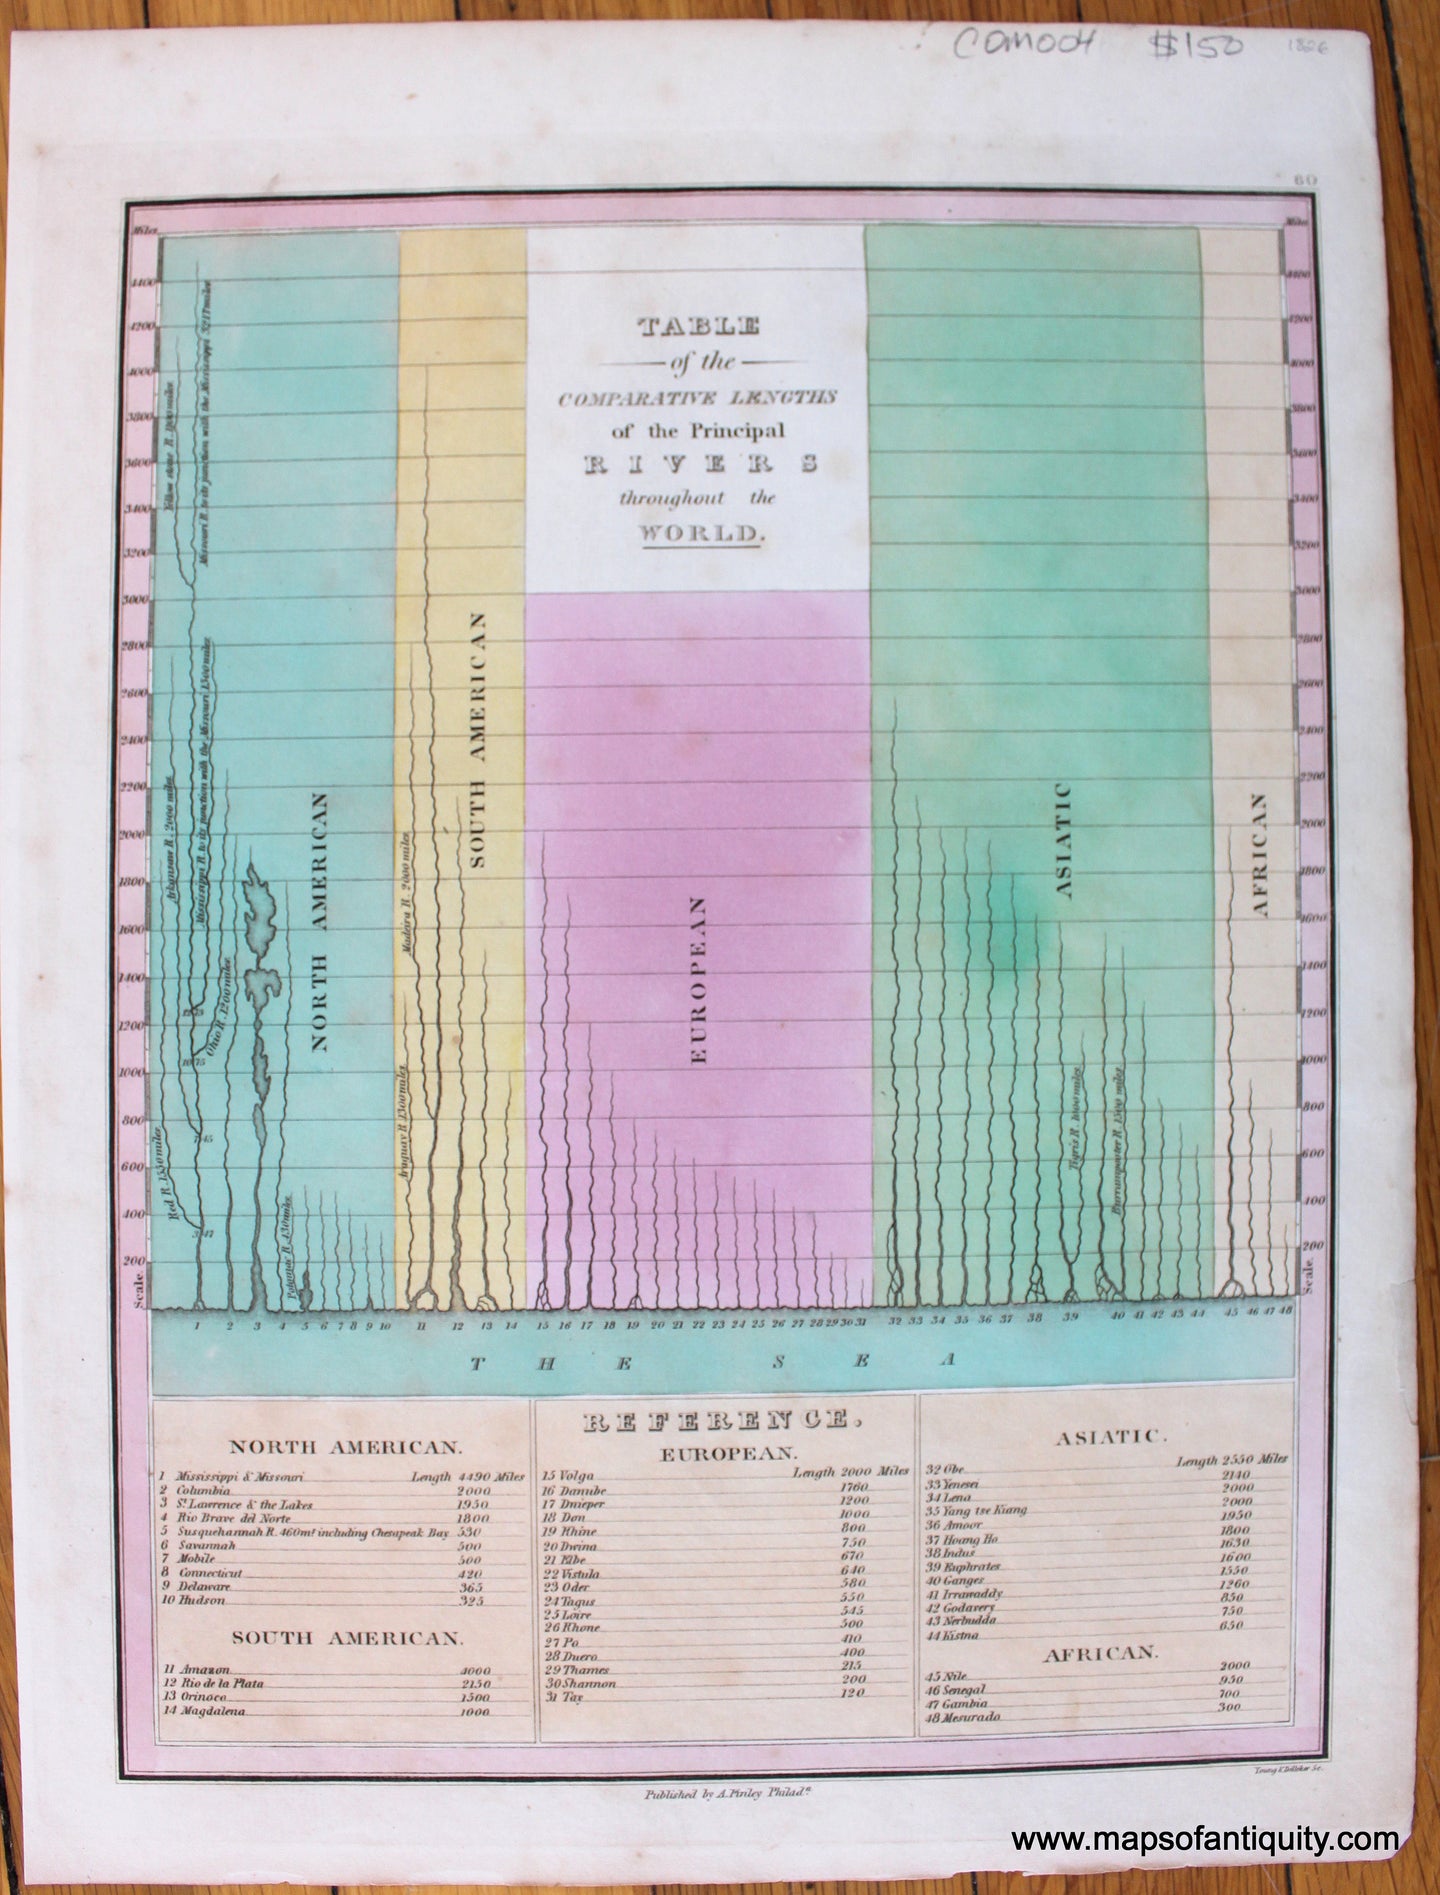 Antique-Map-Table-of-the-Comparative-Lengths-of-the-Principal-Rivers-throughout-the-World.